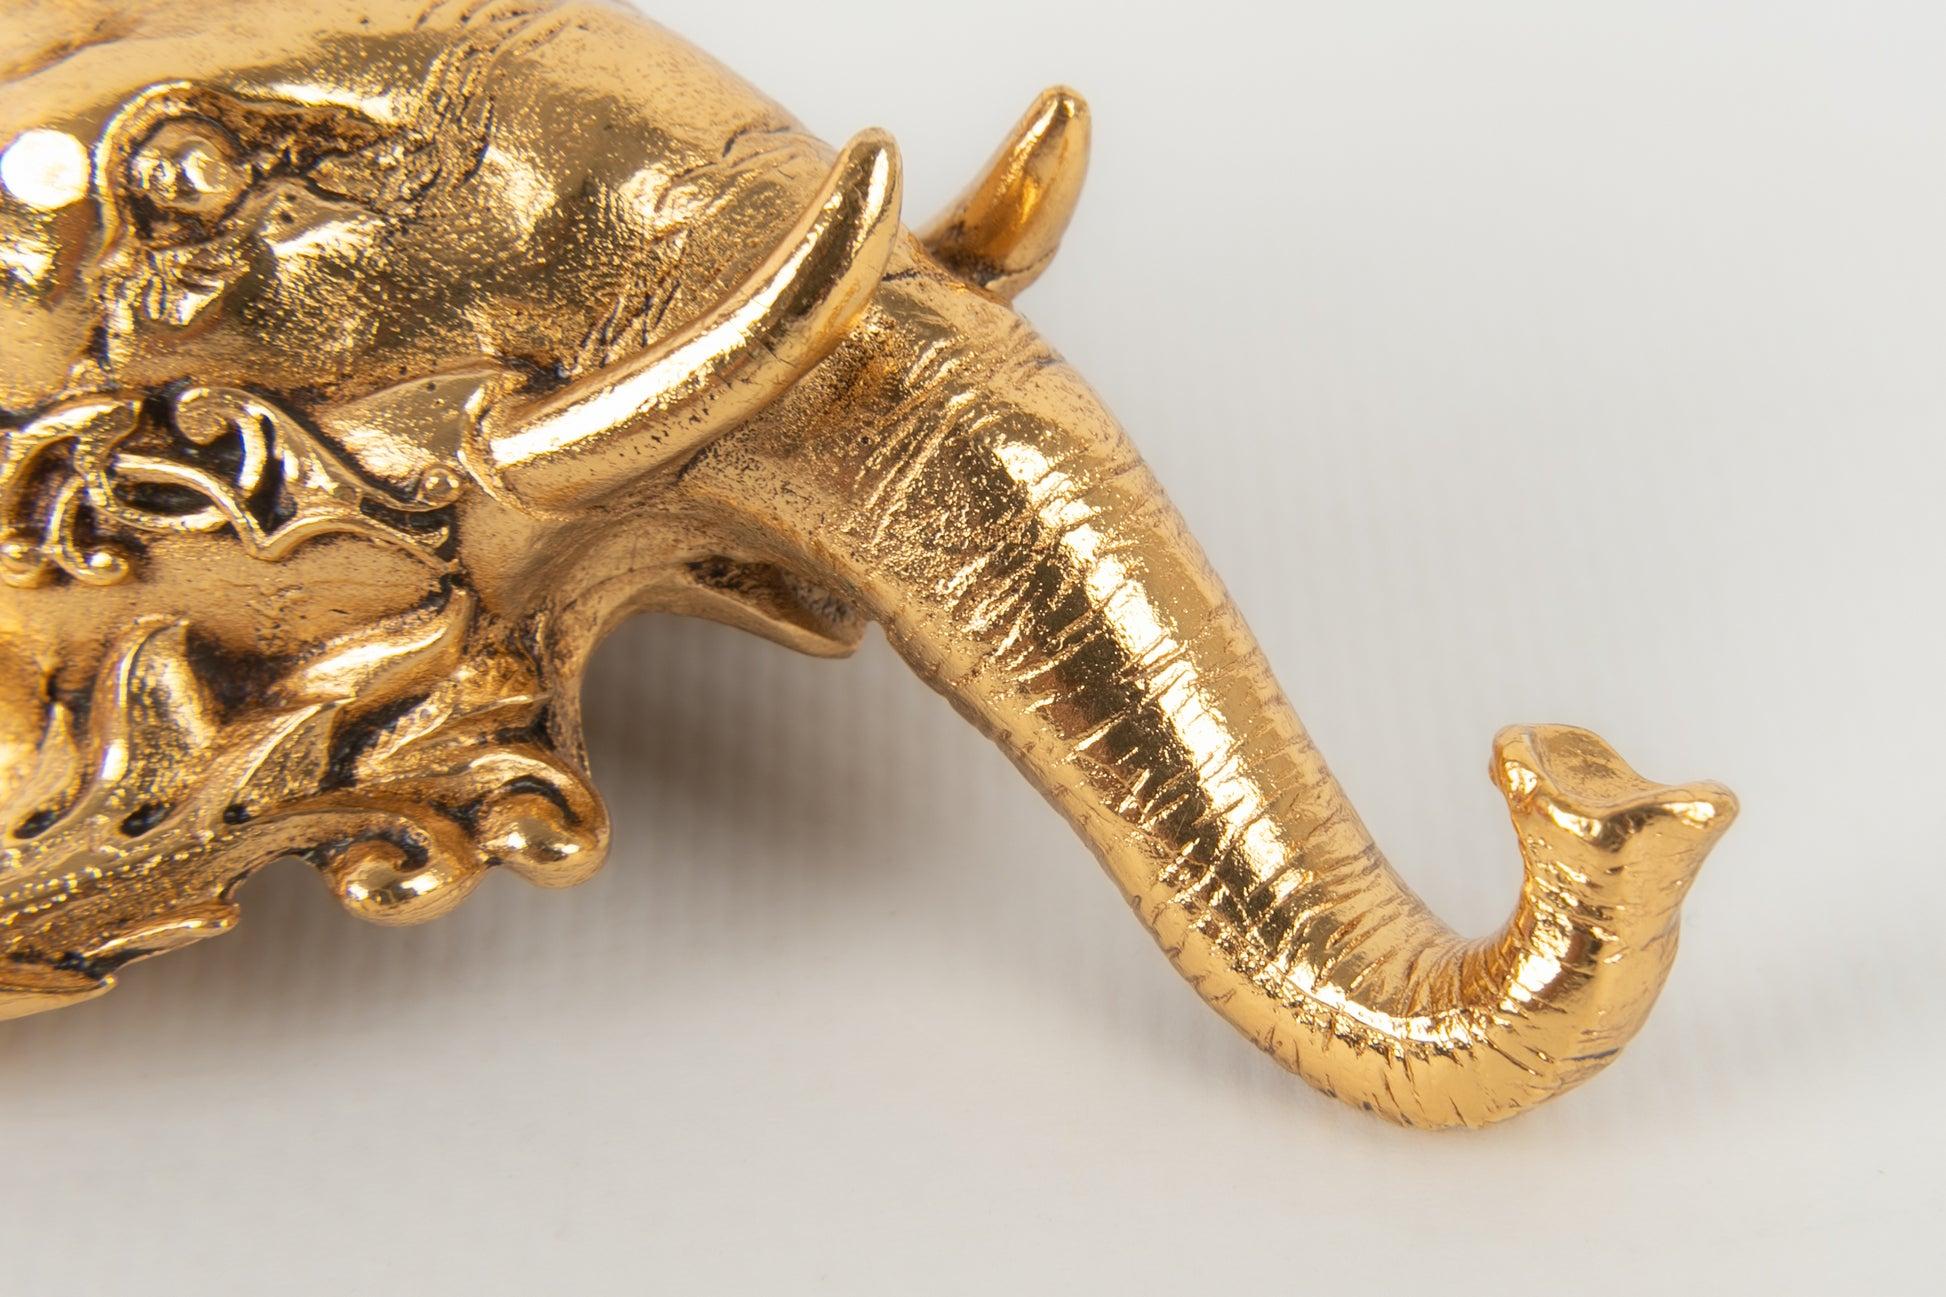 Christian Dior Gold-Plated Metal Pendant Brooch Depicting an Elephant Head For Sale 1